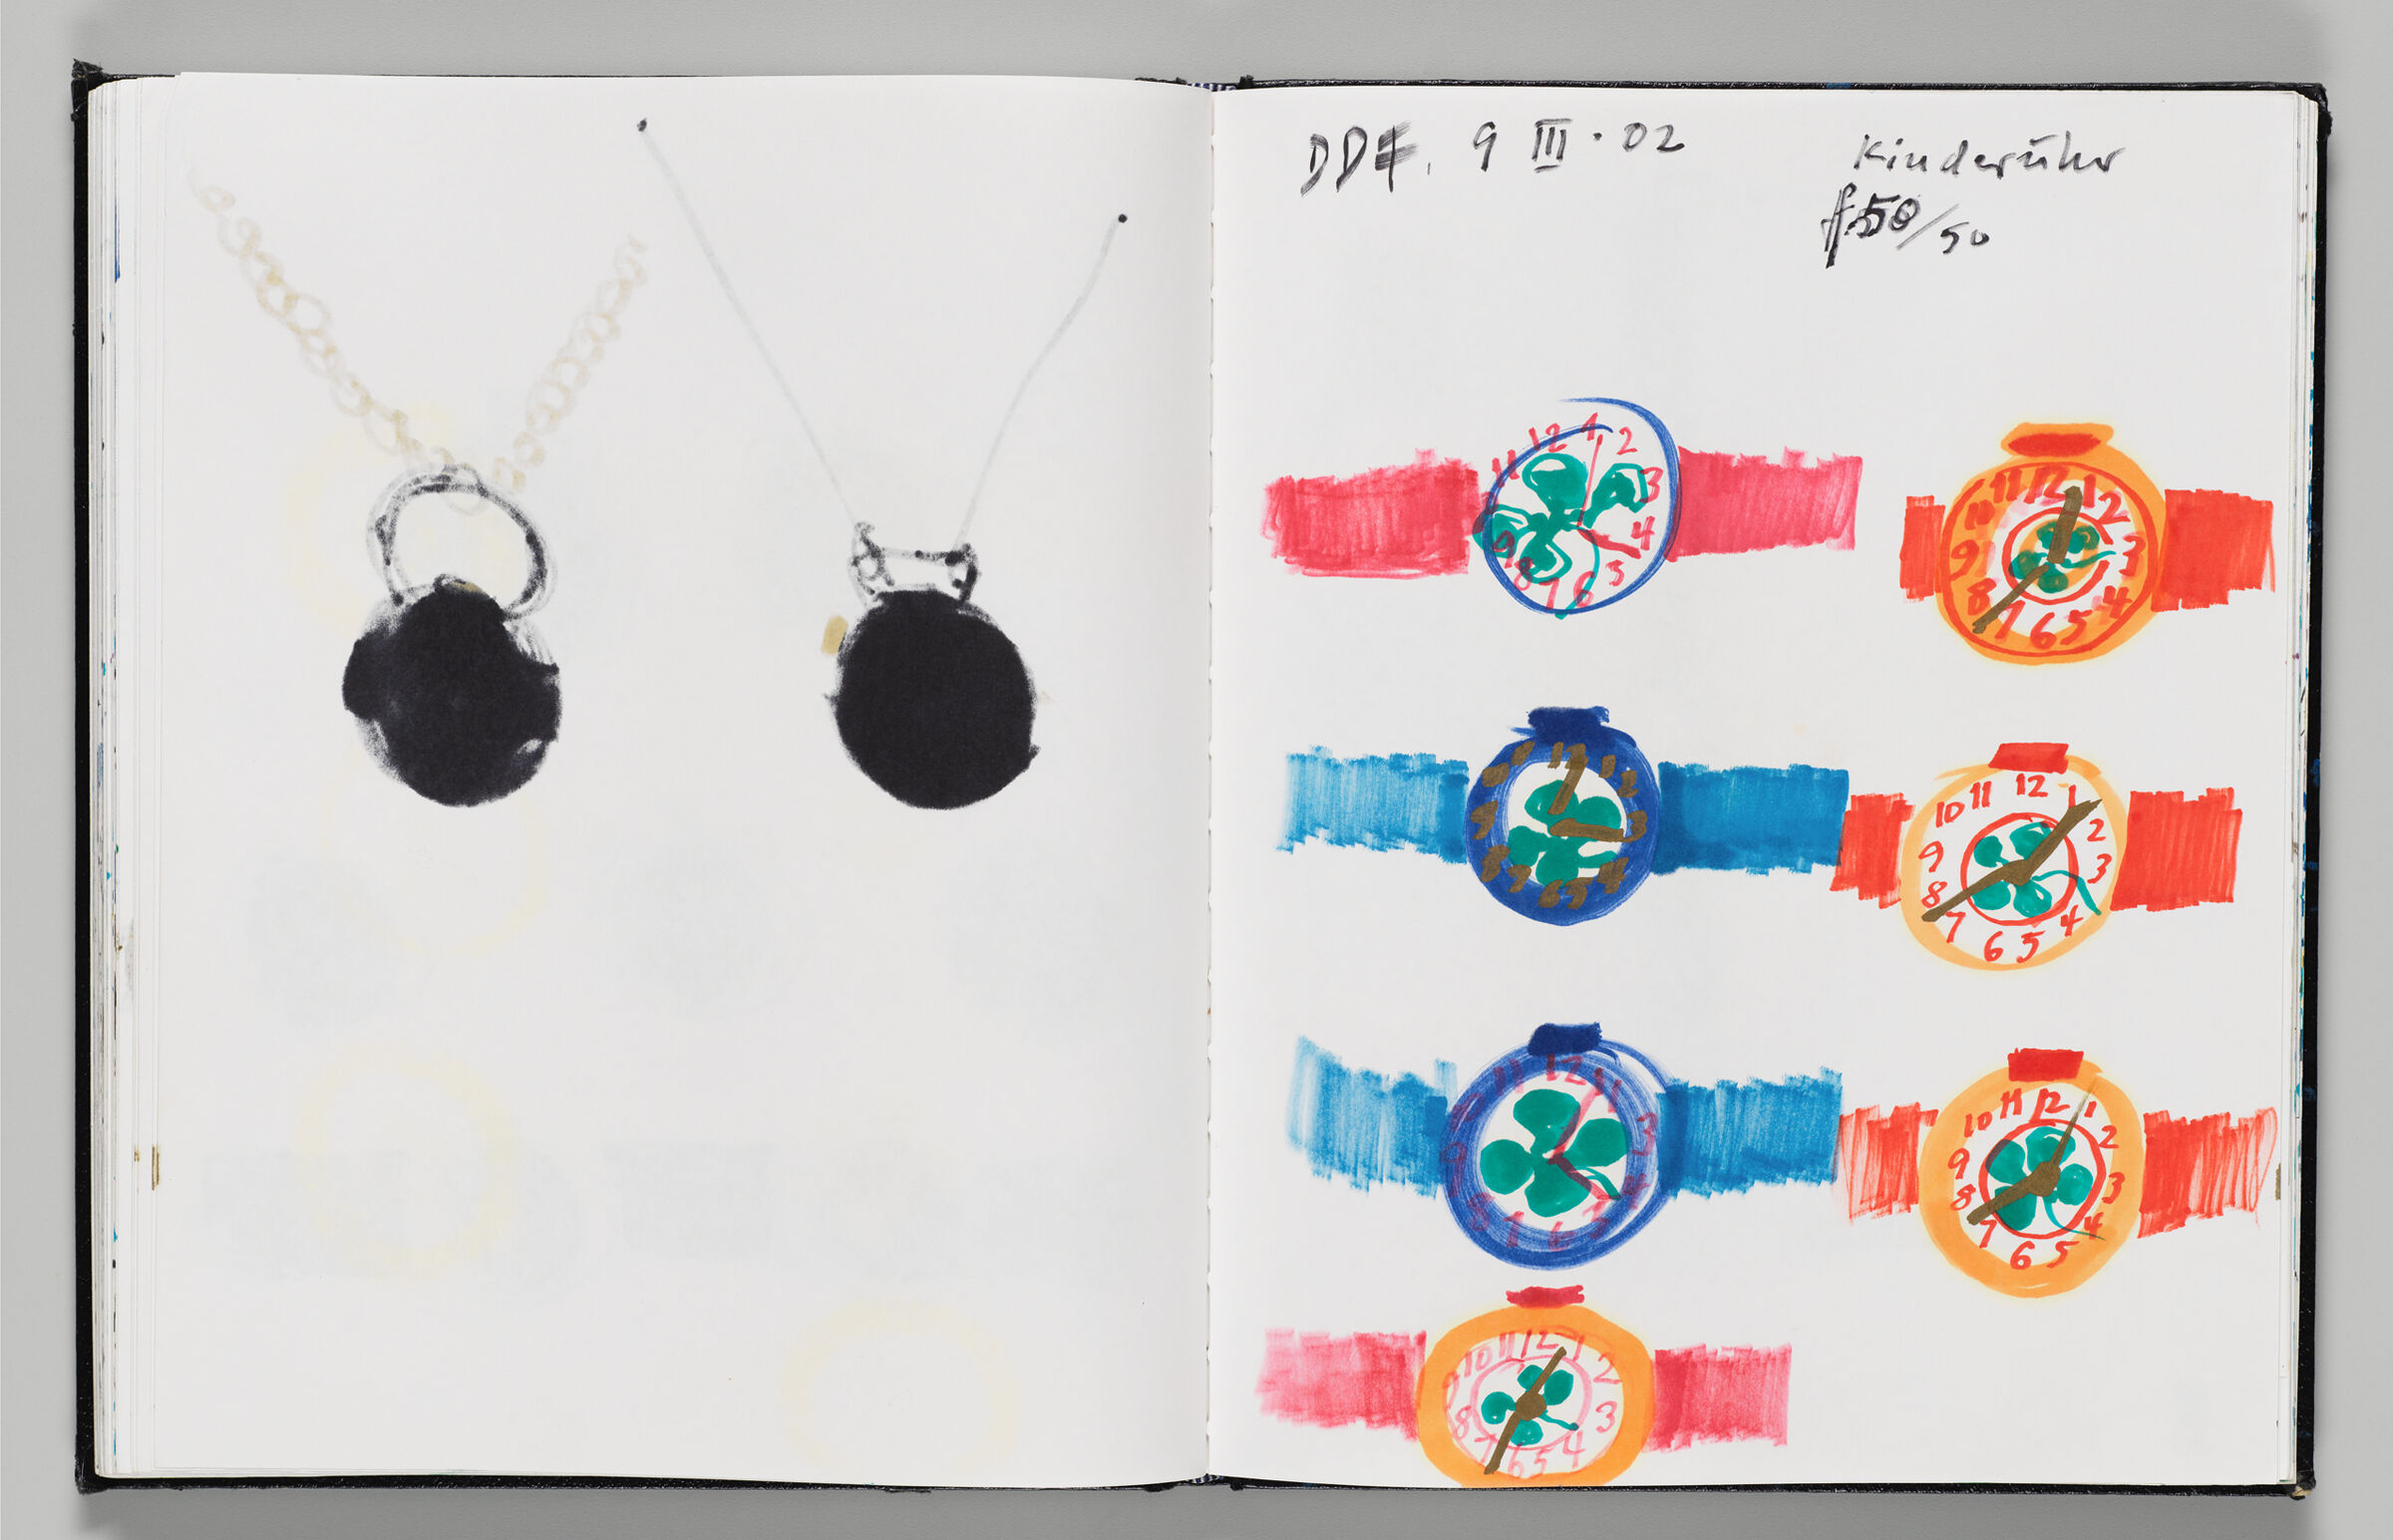 Untitled (Bleed-Through Of Previous Page, Left Page); Untitled (Children's Watch Designs, Right Page)